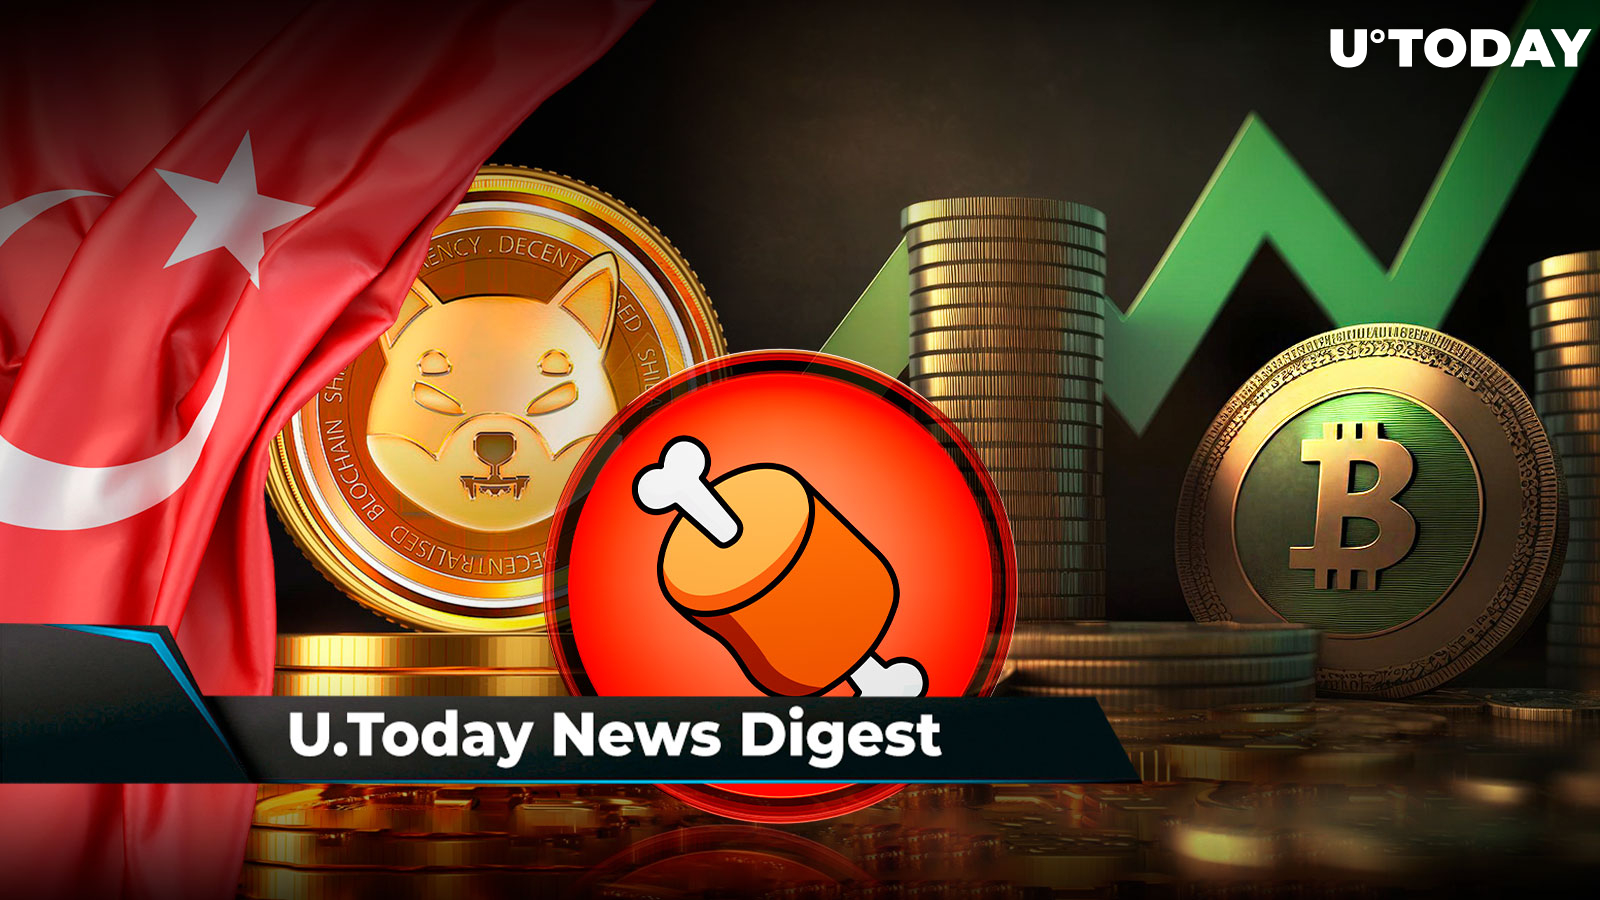 Shibarium and BONE Listed on Turkish Crypto Platform, Bitcoin Might Meet 'Key Pivot Point' on Nov. 21, Ripple Keeps Moving Millions of XRP to Bitstamp: Crypto News Digest by U.Today